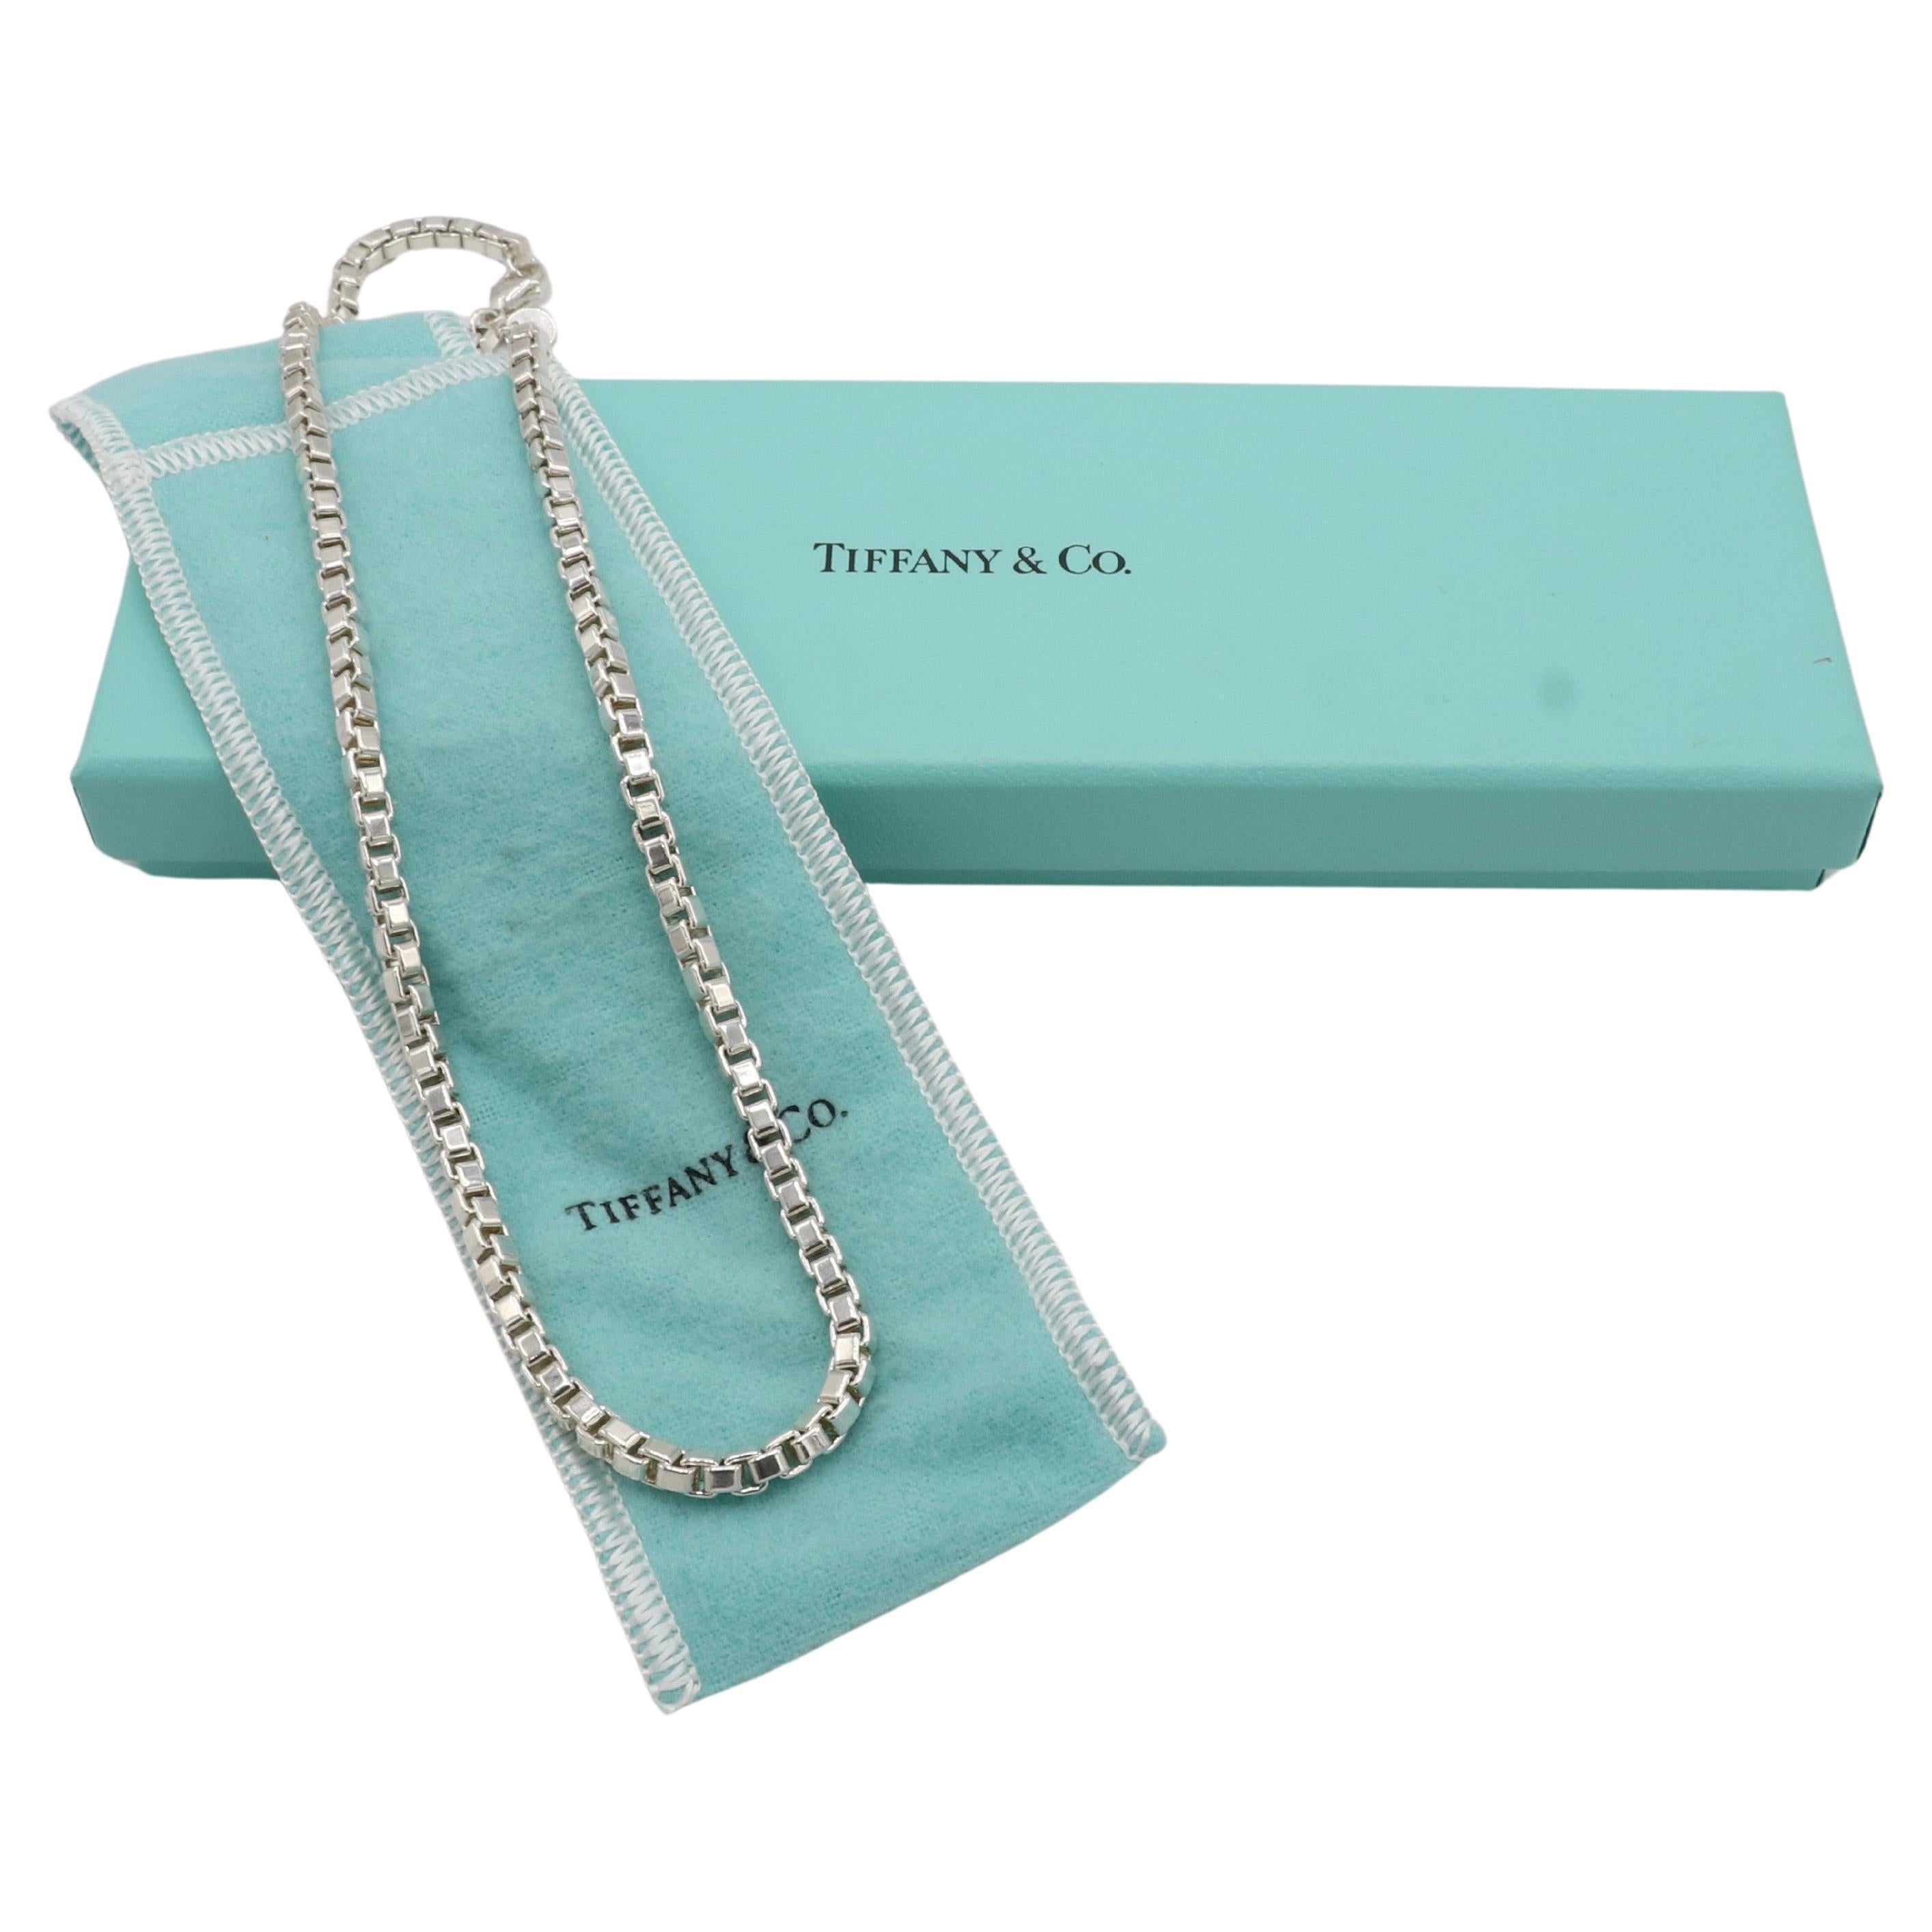 Tiffany & Co. Venetian Sterling Silver Box Chain Link Necklace 
Metal: Sterling silver 925
Weight: 38.9 grams
Width: 4mm
Length: 17 inches
Signed: ©Tiffany & Co. 925